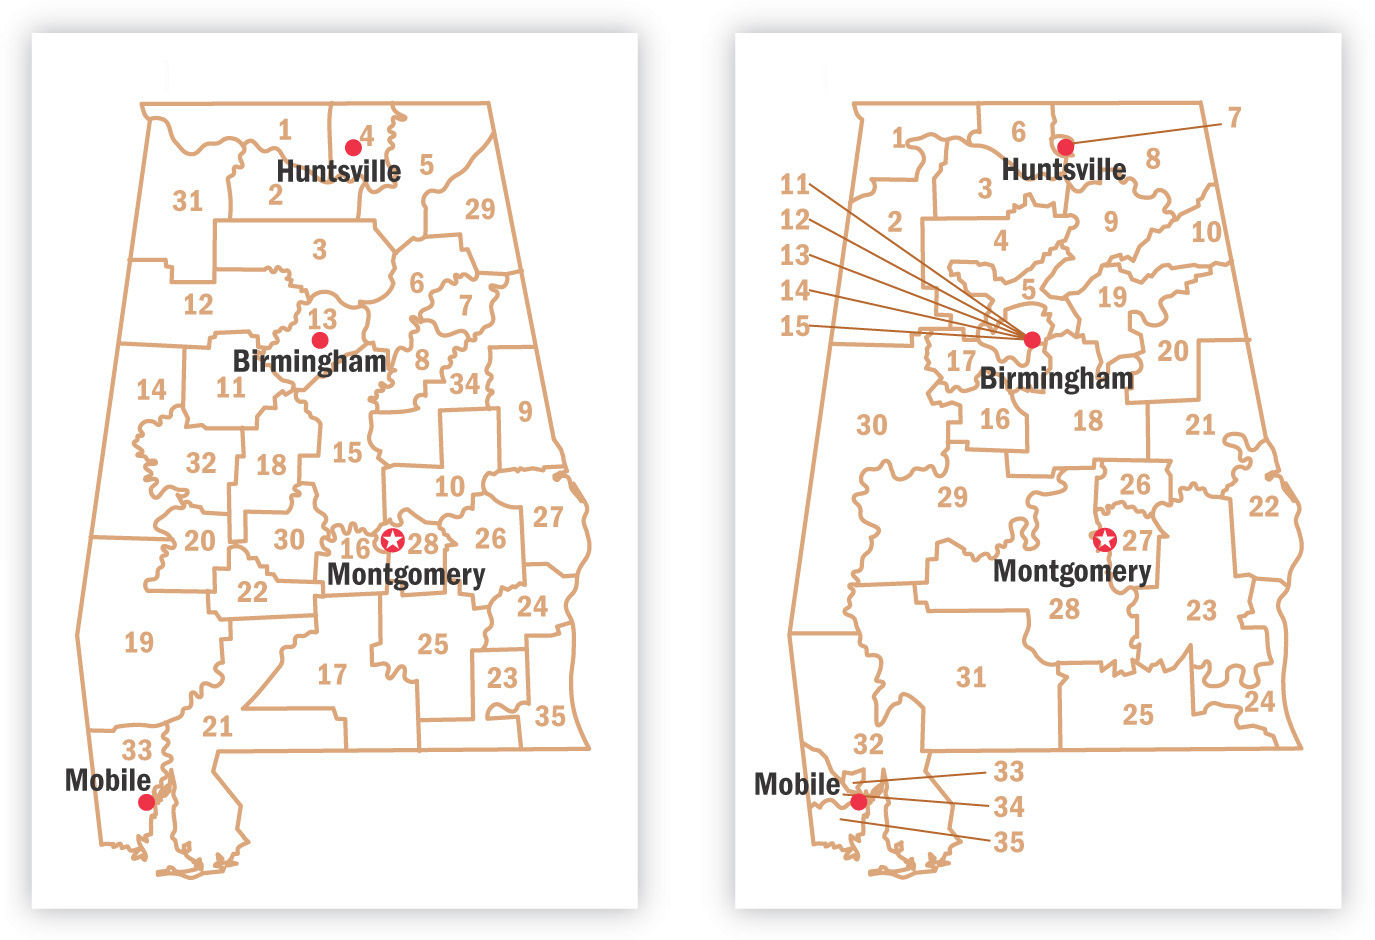 Maps: two maps show Alabama divided into many different districts. The map on the right has many tiny districts in and around cities.